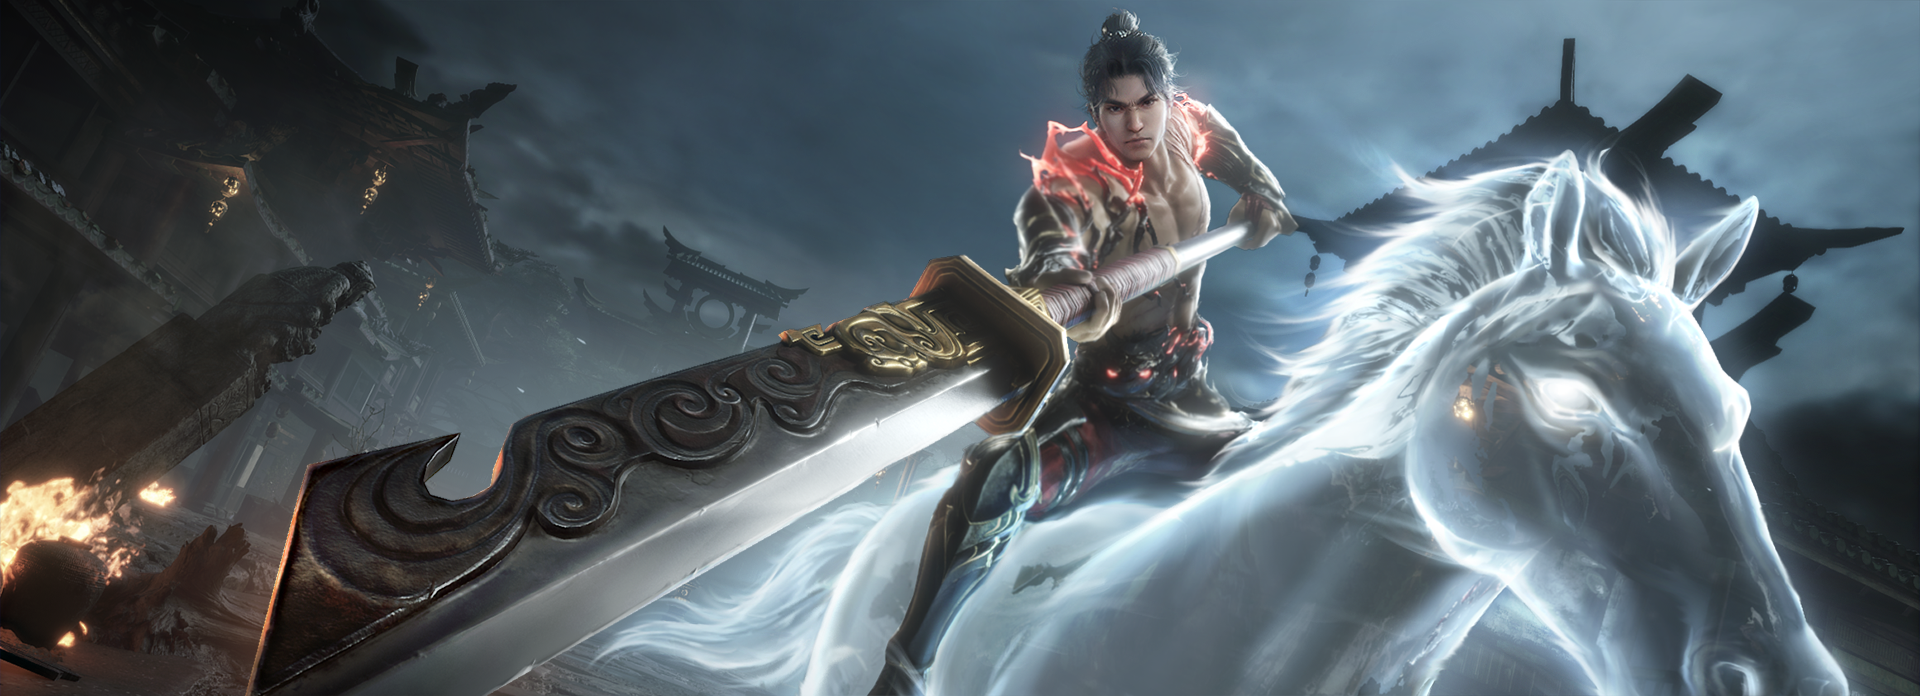 UNLEASH YOUR INNER GOD OF WAR AS NARAKA DEBUTS ITS NEW POLE SWORD WEAPON